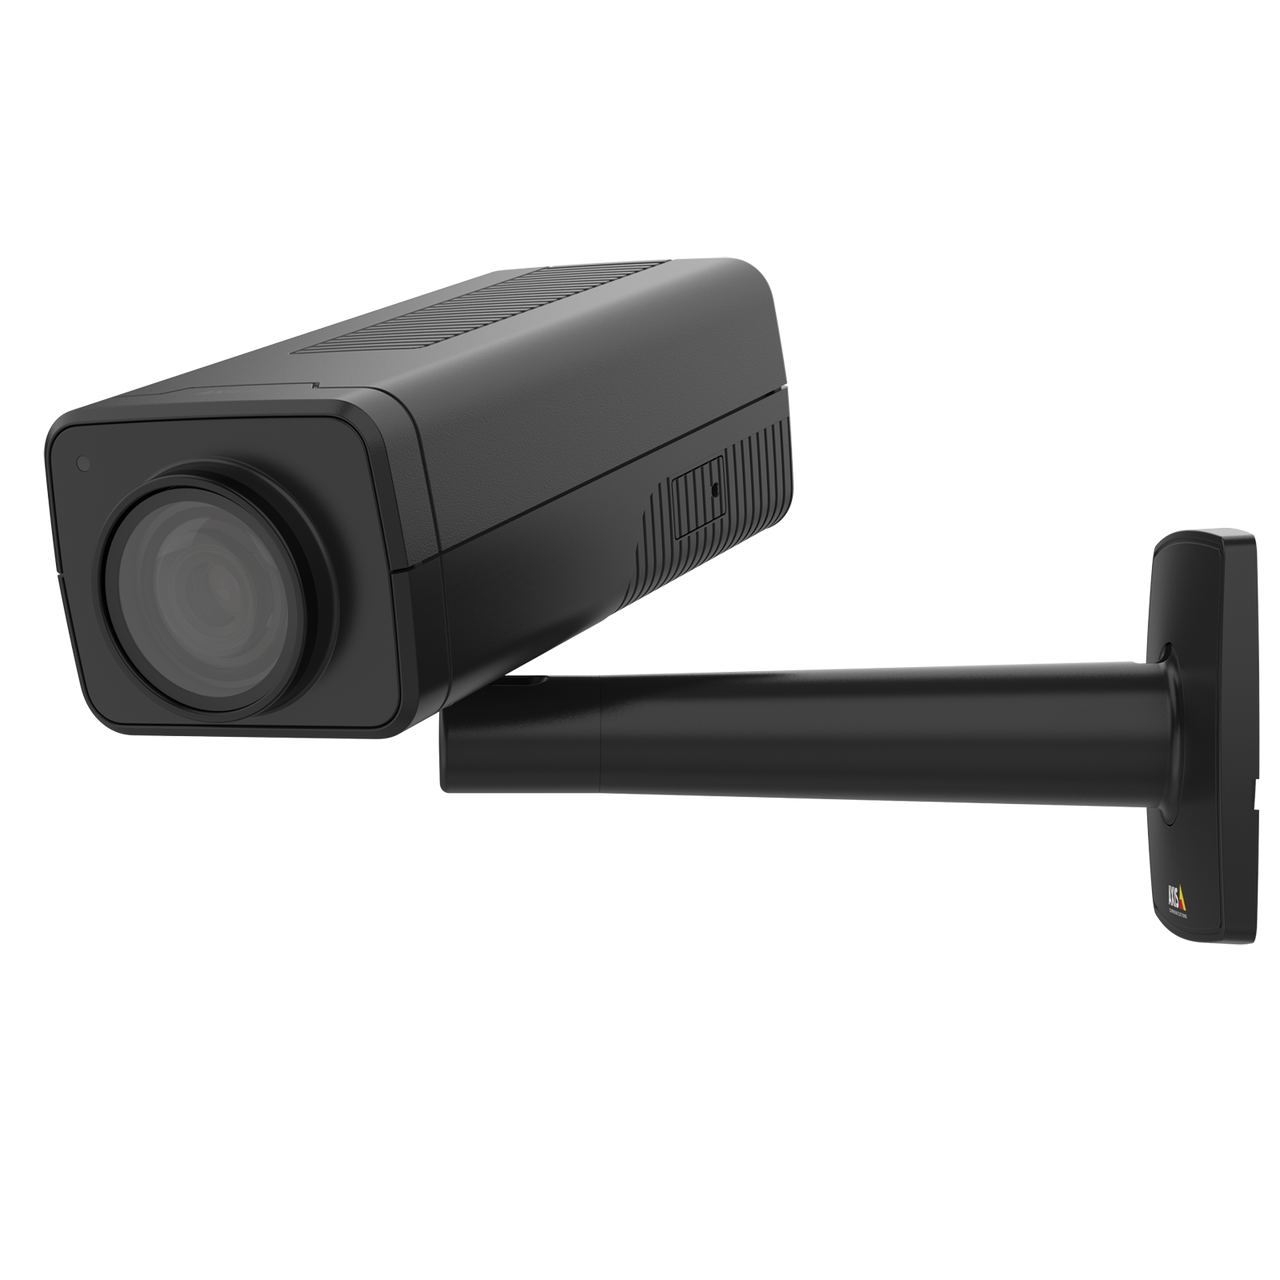 AXIS Q1715 BLOCK CAMERA High performance with endless options